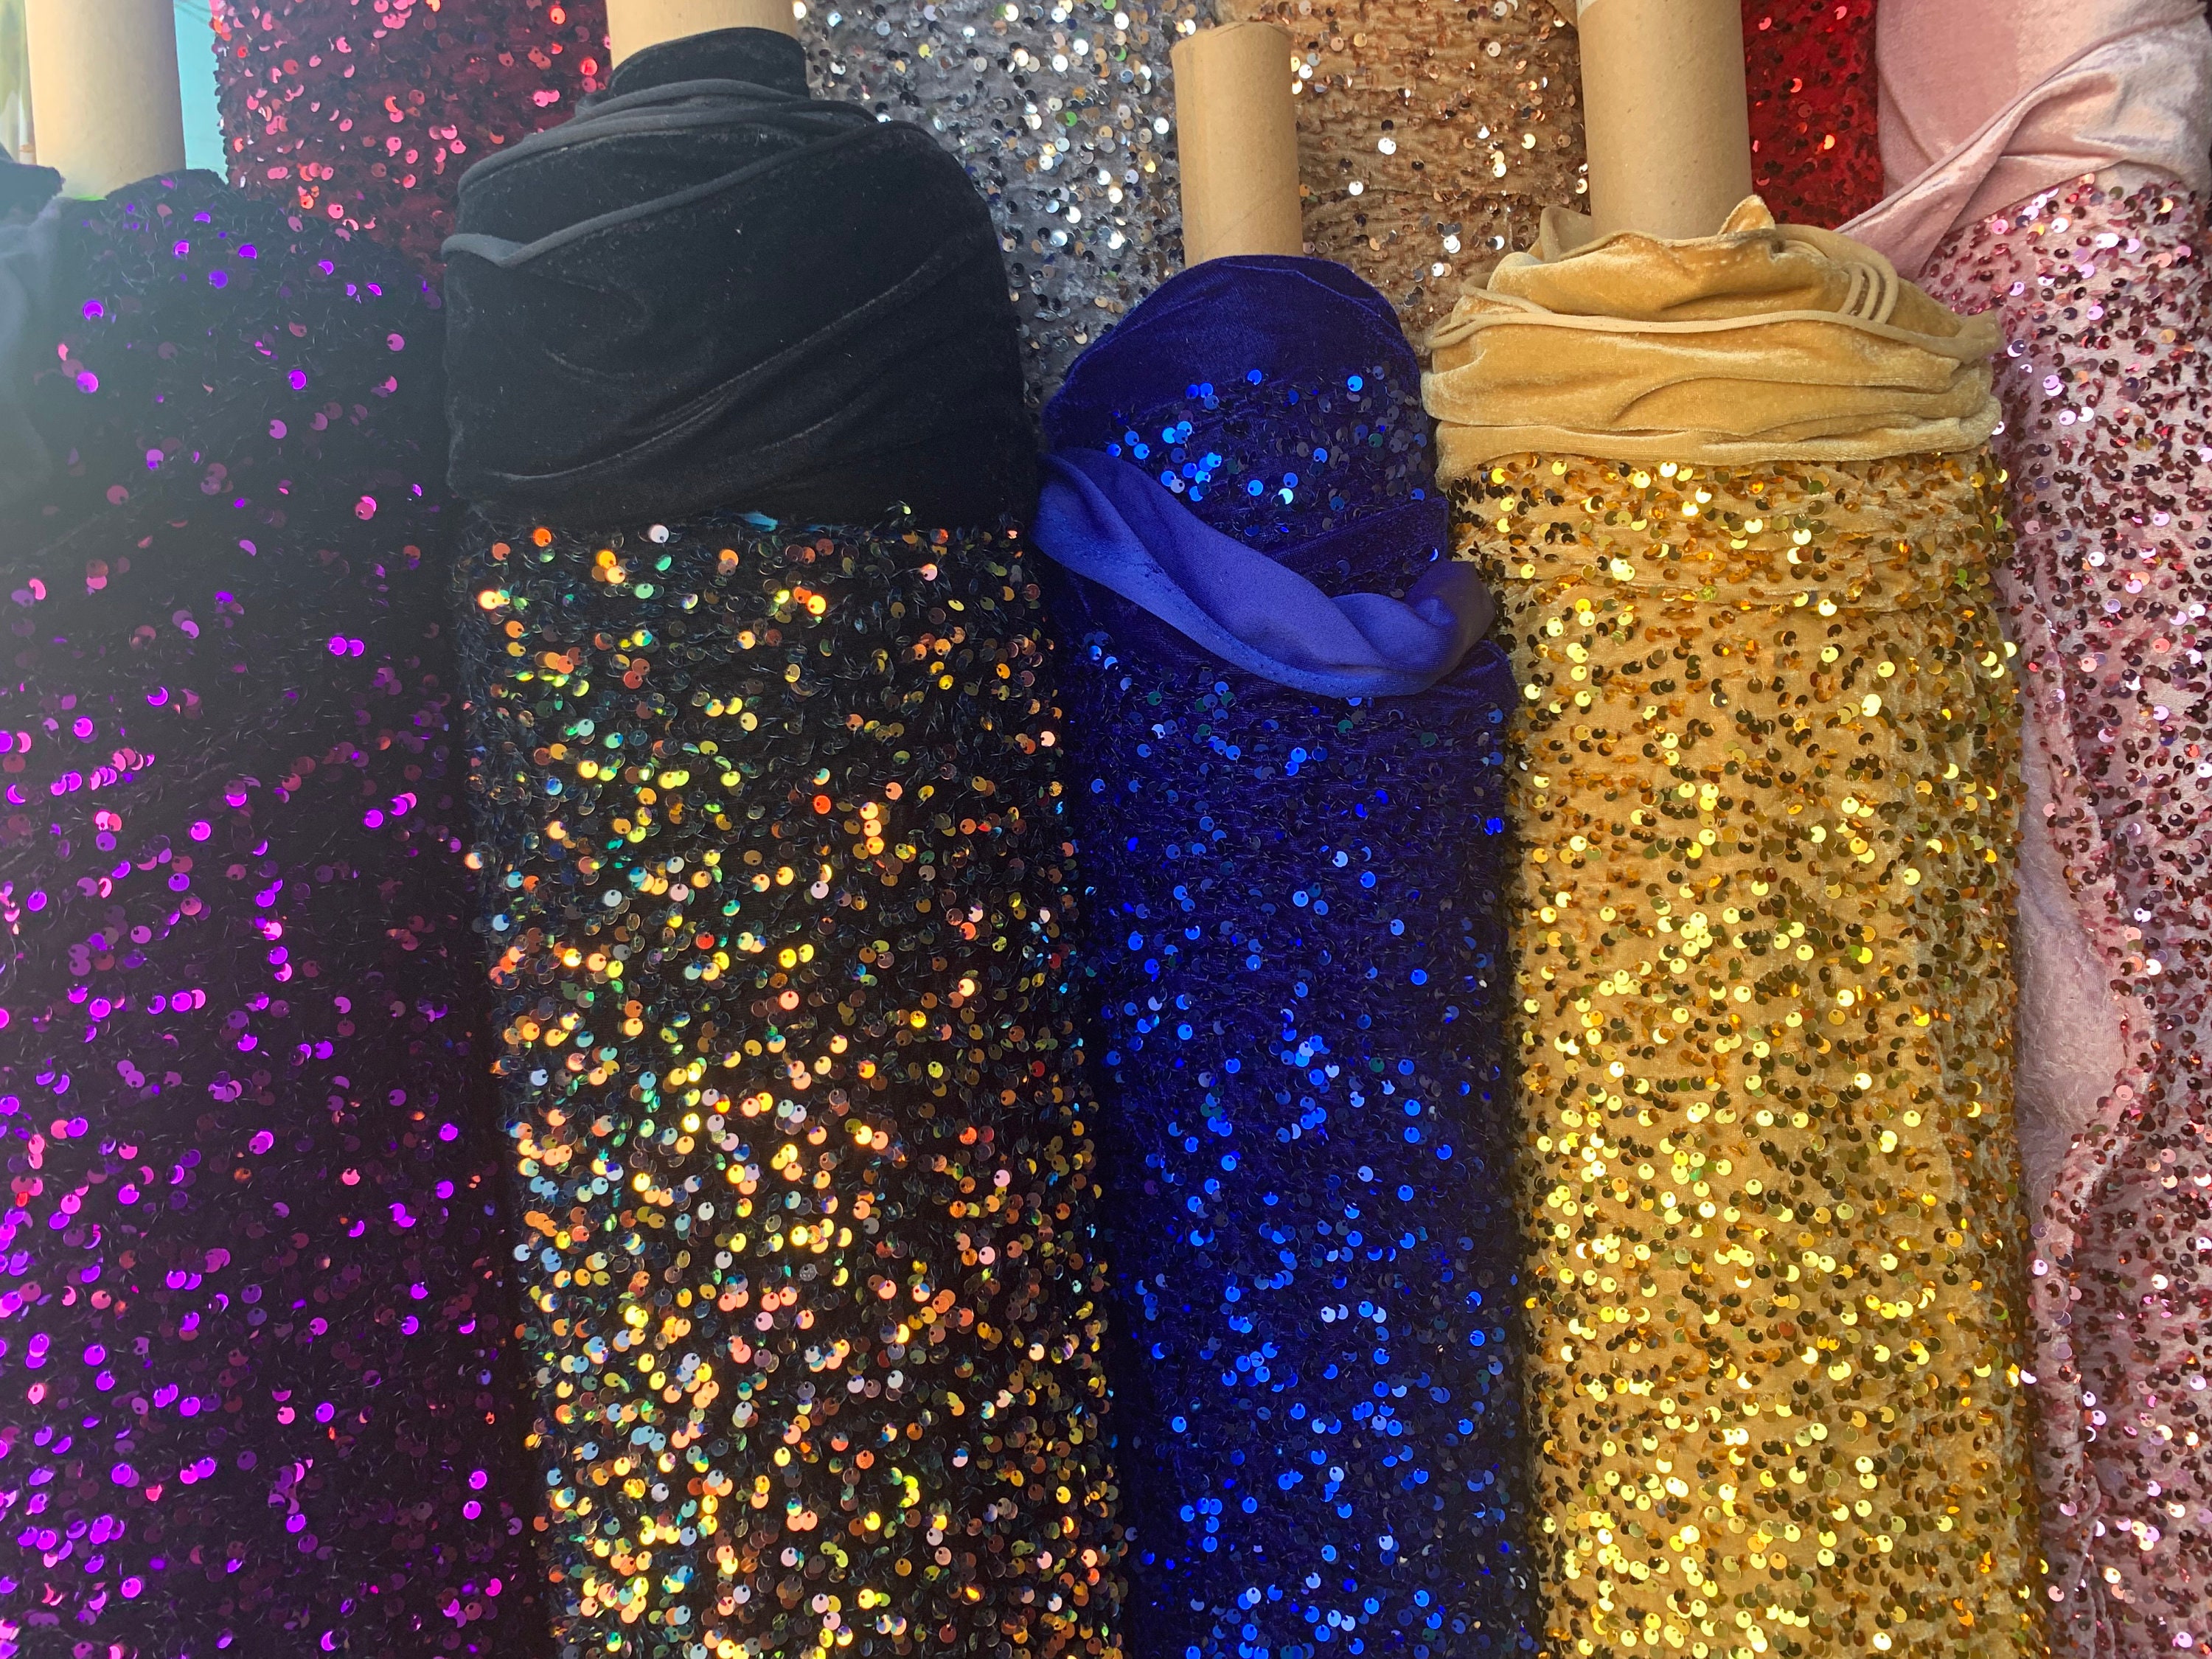 Royal Blue Sequin on Royal Stretch Velvet With Luxury Sequins All Over 5mm  Shining Sequins 2-way Stretch 58/60 choose the Quantity -  Canada